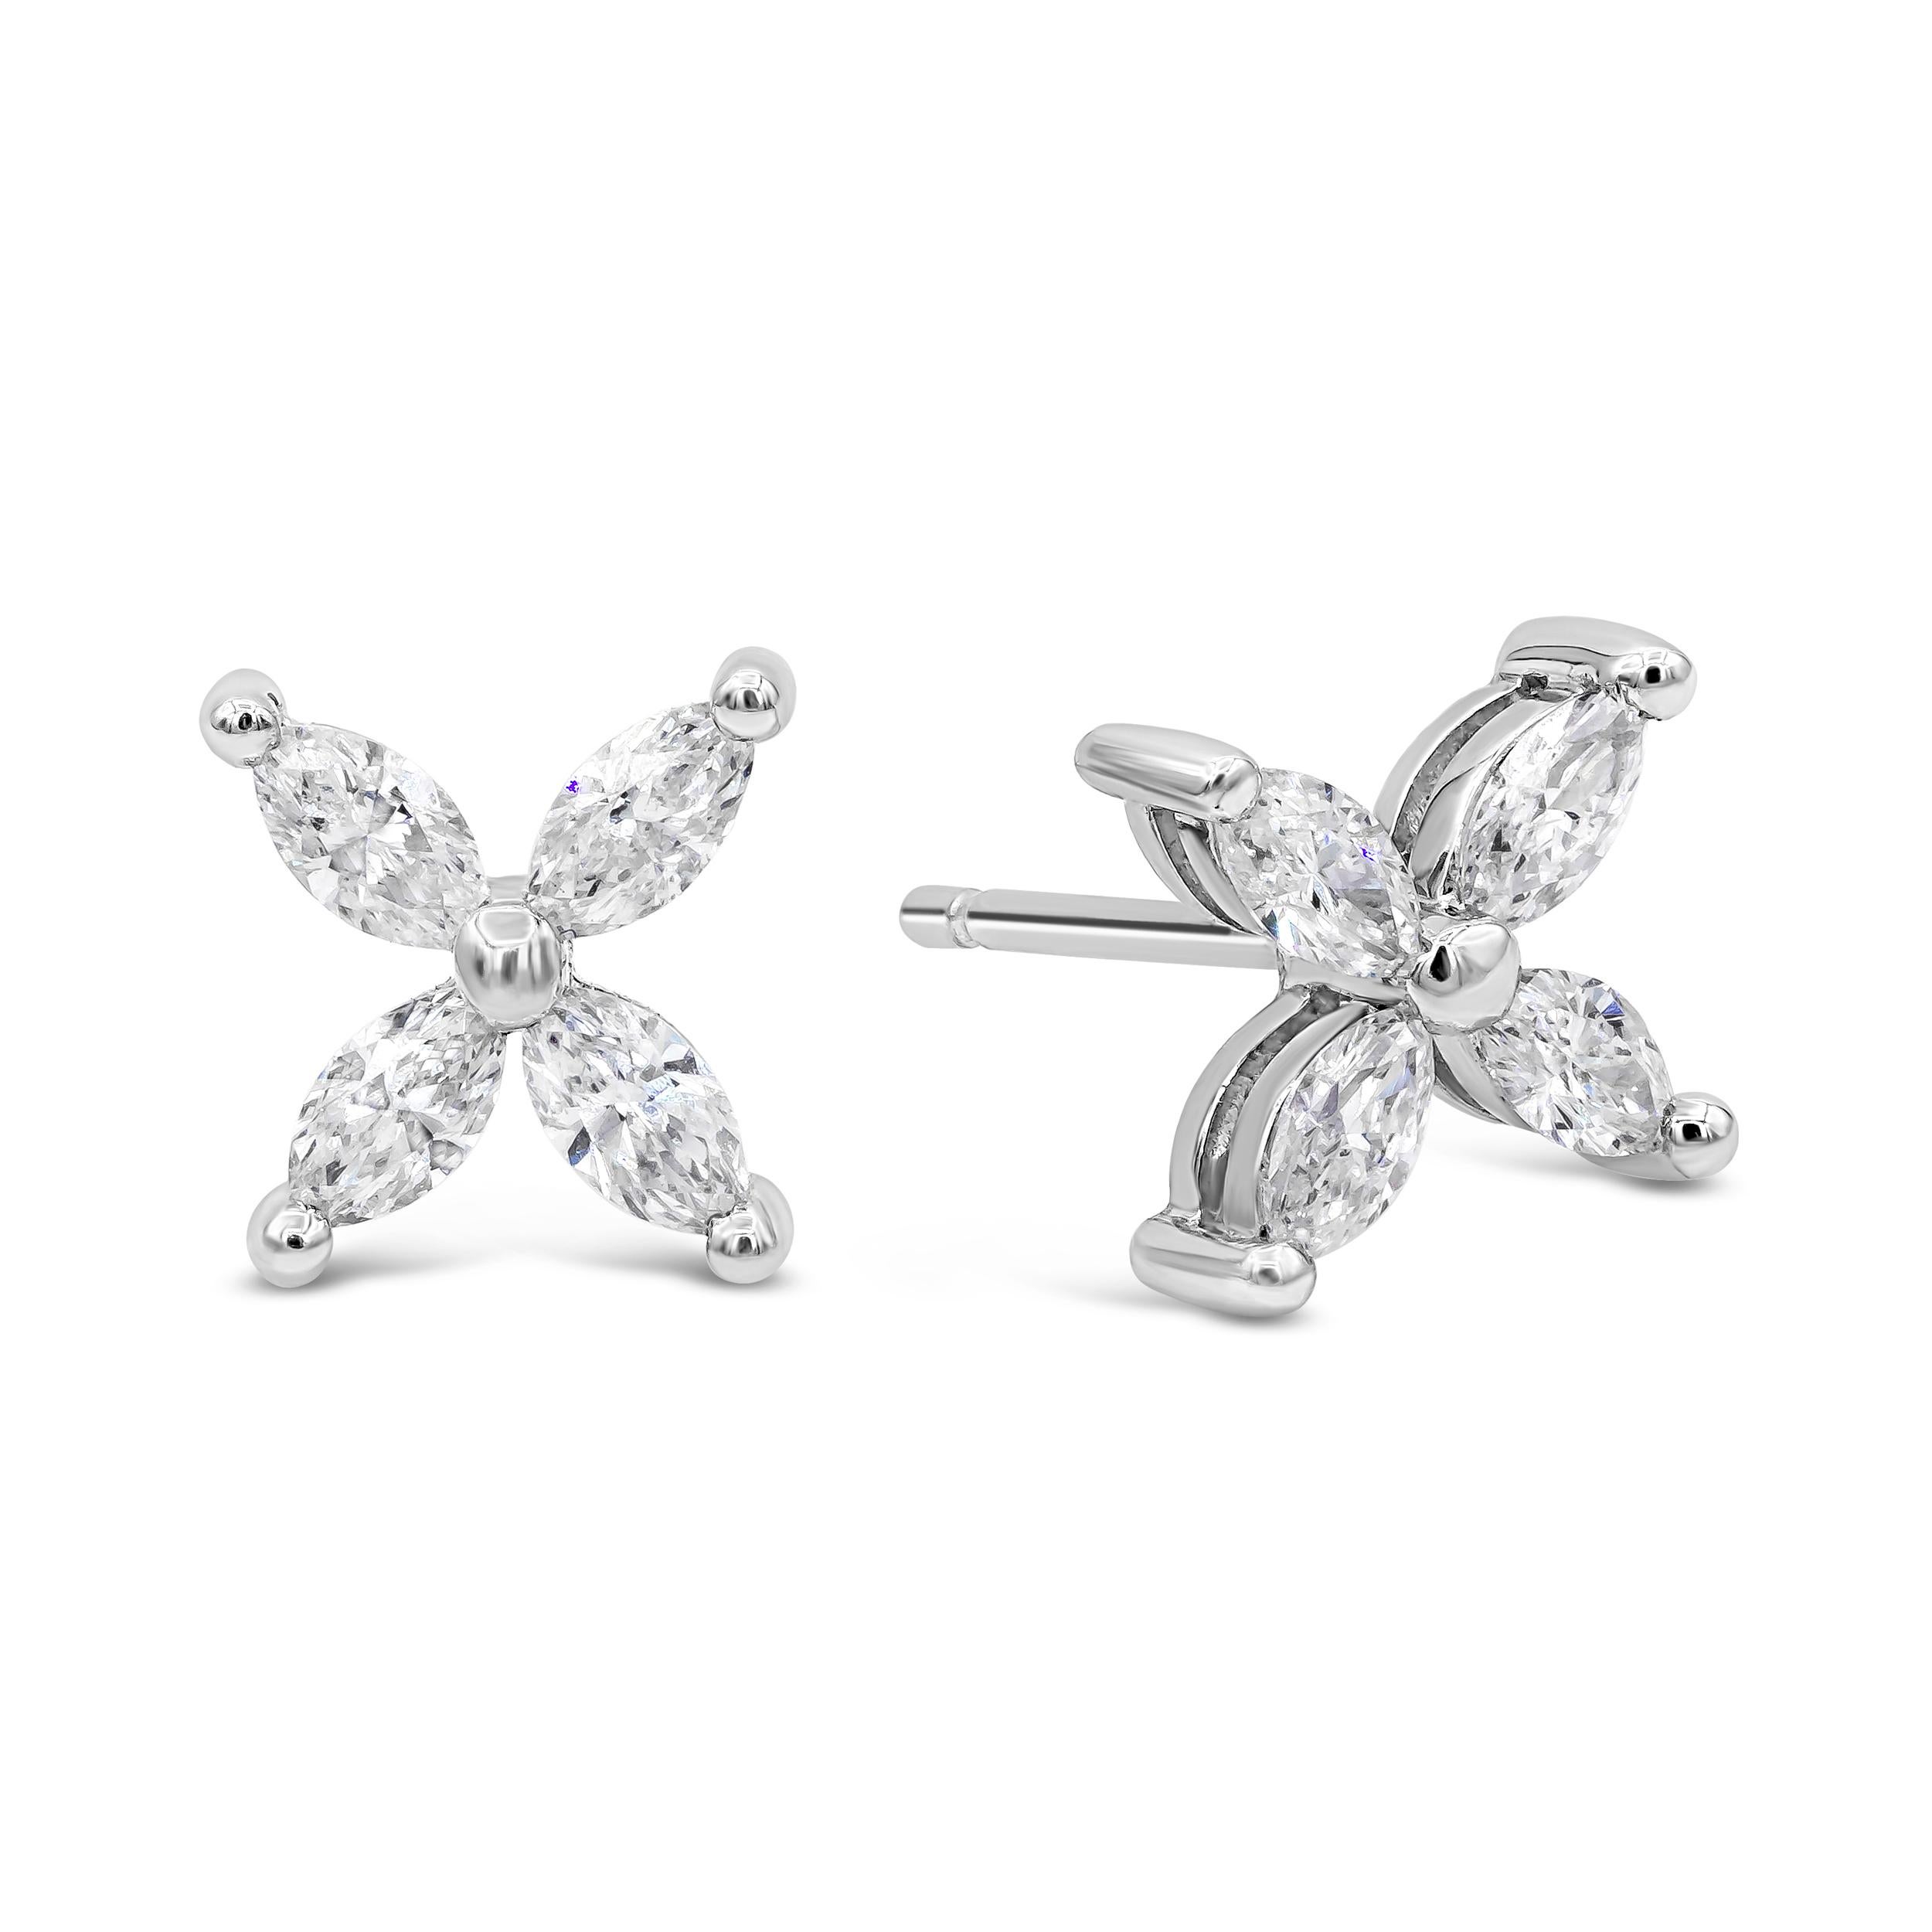 A chic pair of stud earrings each showcasing four marquise cut diamonds, set in a floral motif. Diamonds weigh 0.83 carats total. Made in 18 karat white gold.

Style available in different price ranges. Prices are based on your selection of the 4C’s